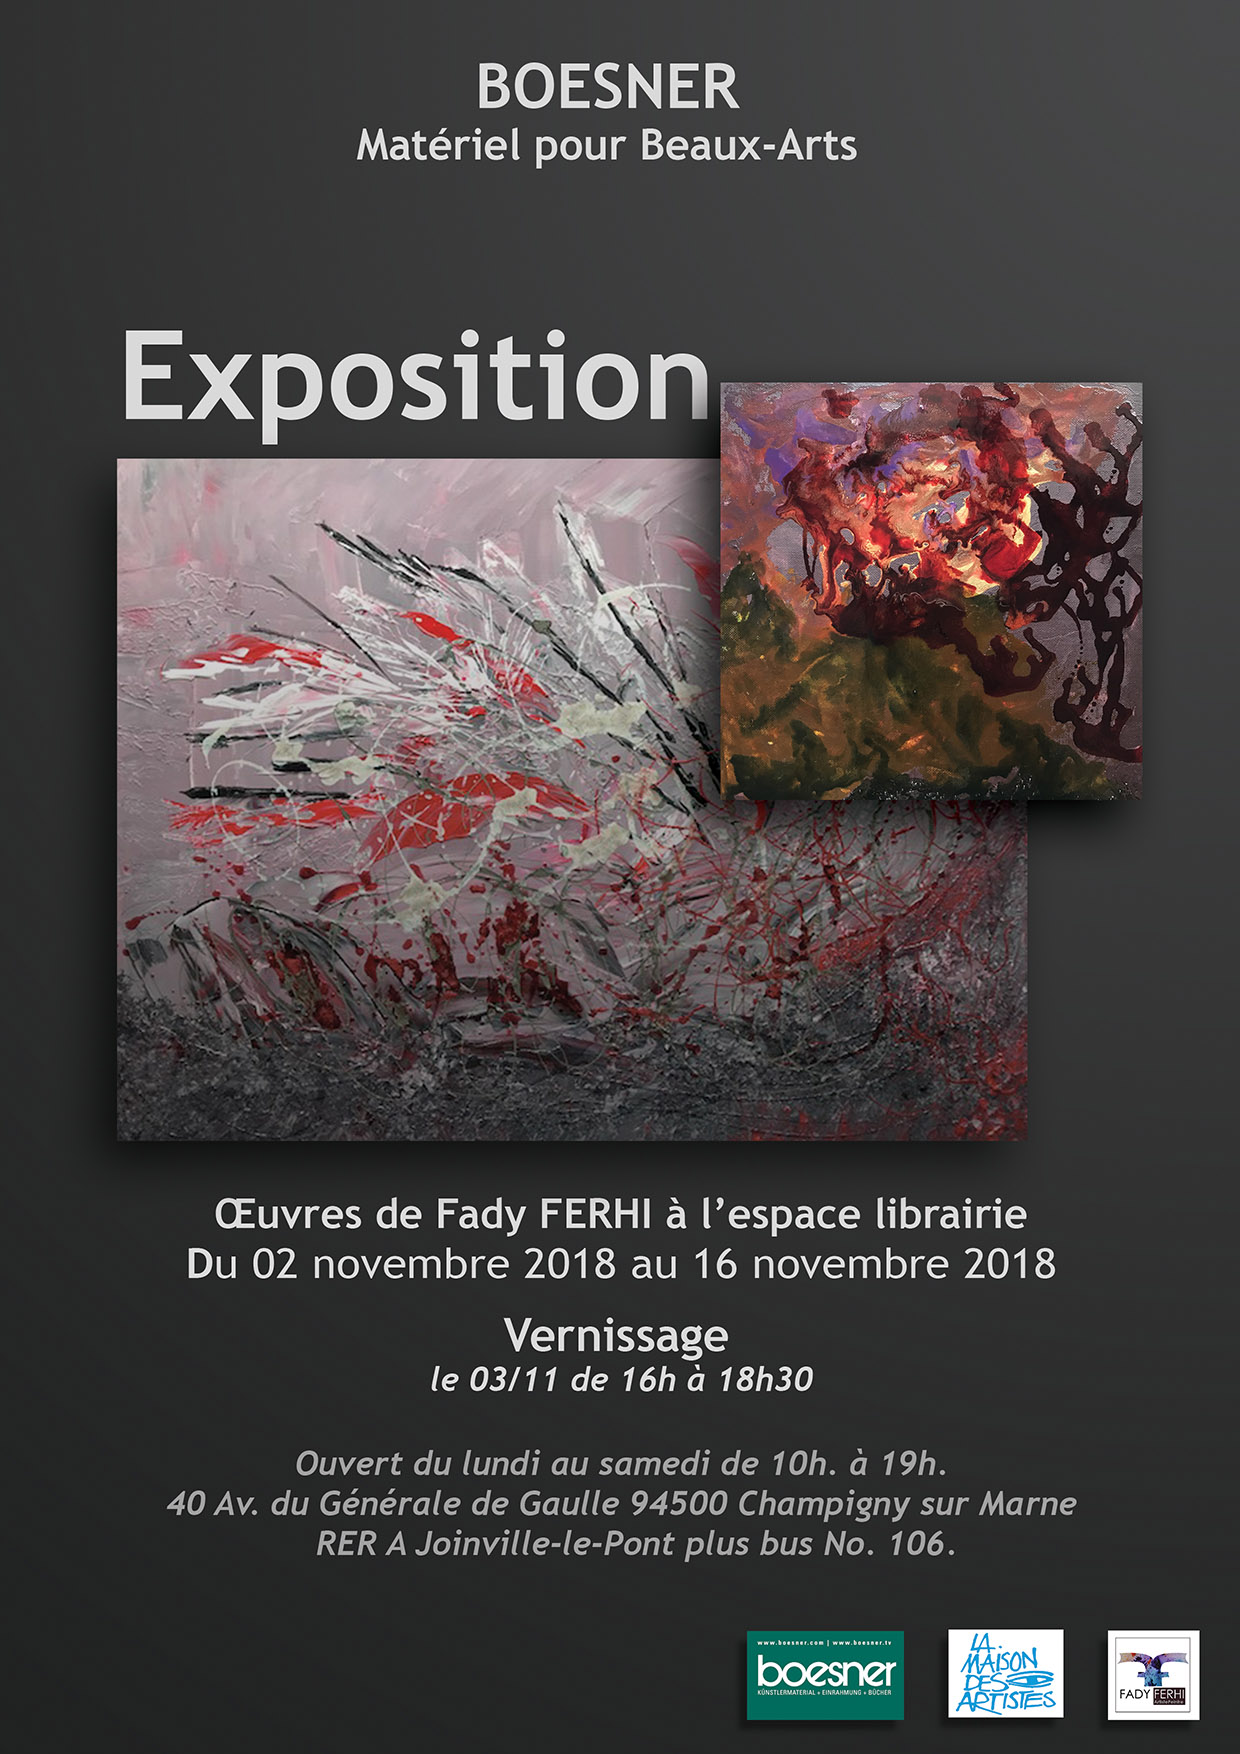 Exposition Fady FERHI chez Boesner